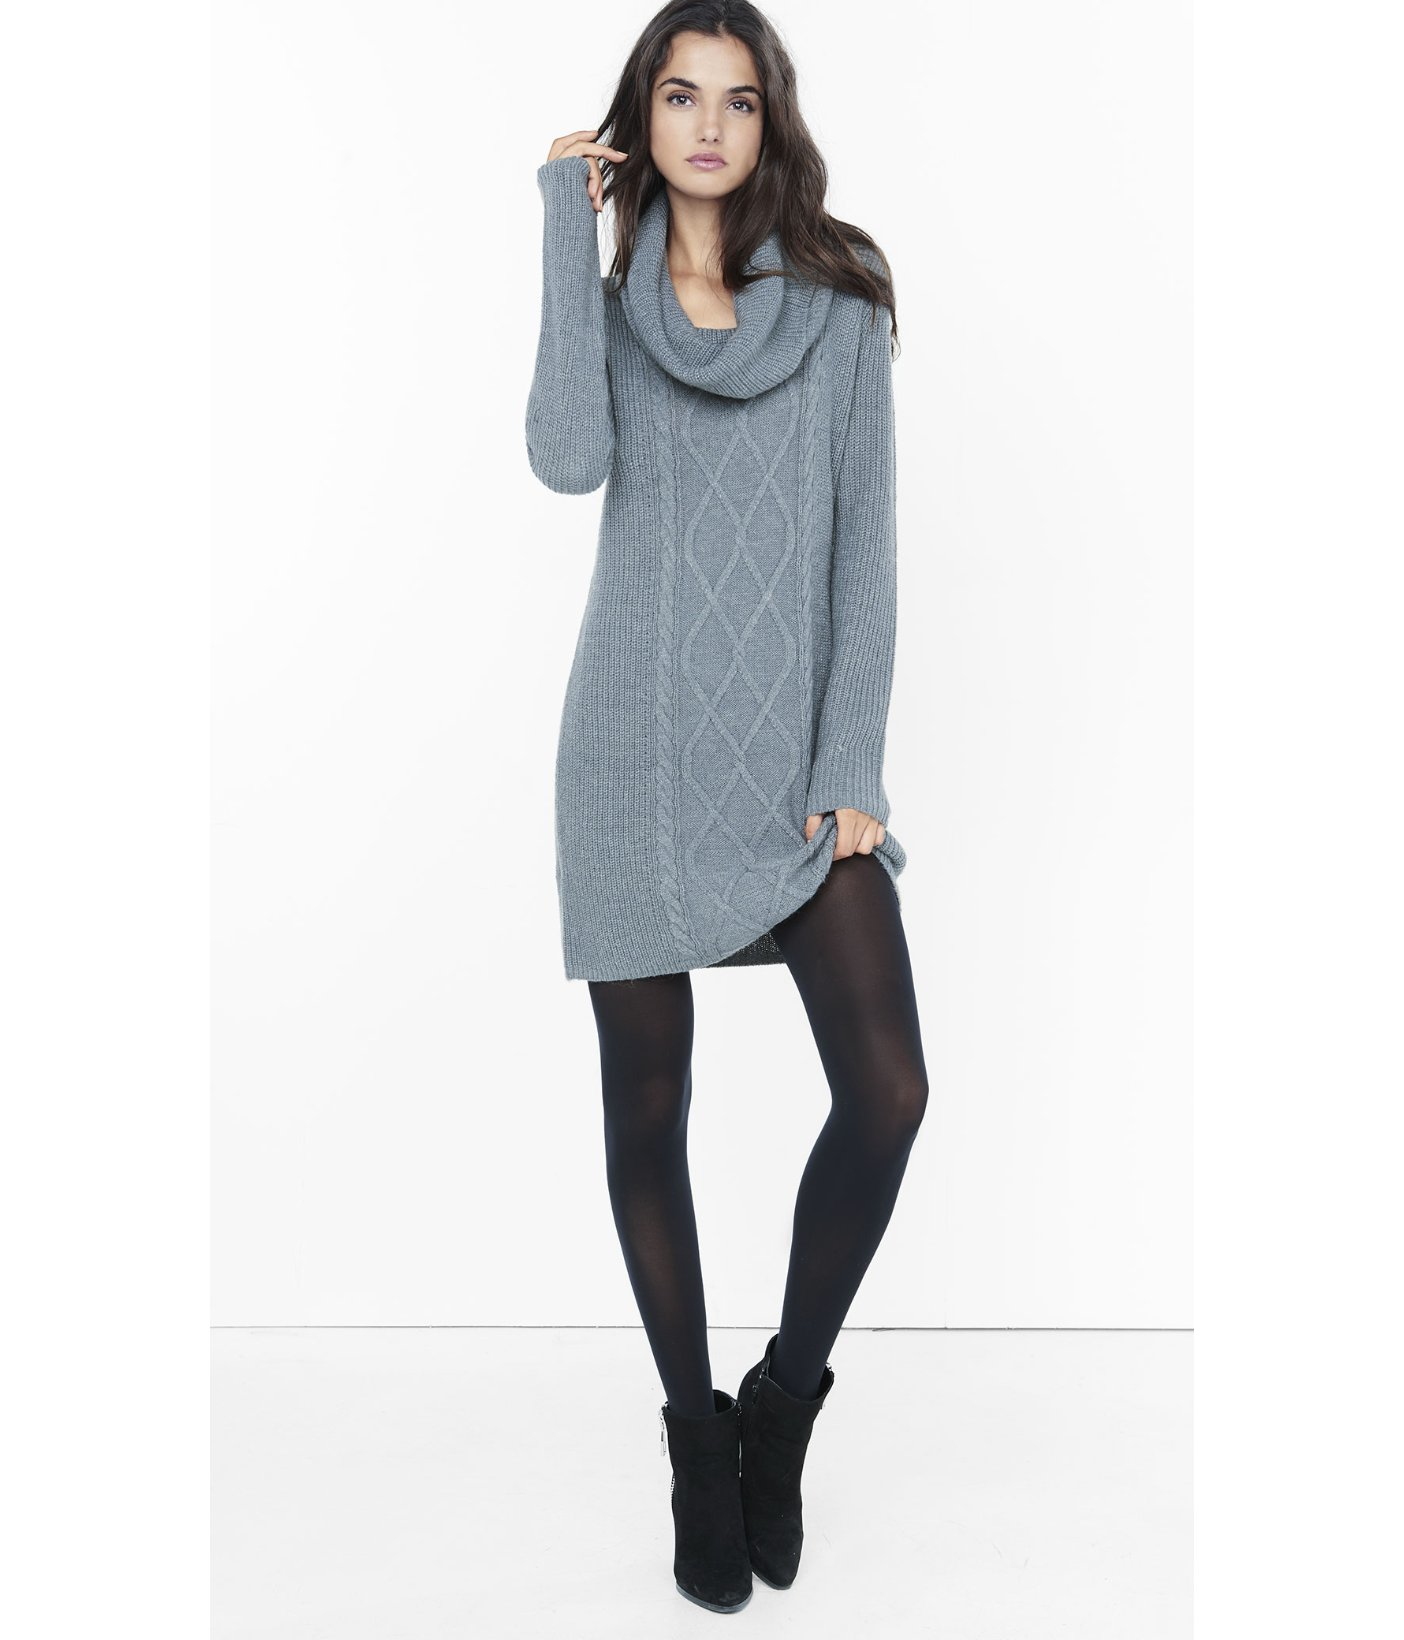 Express Gray Cowl Neck Cable Knit Sweater Dress in Gray | Lyst